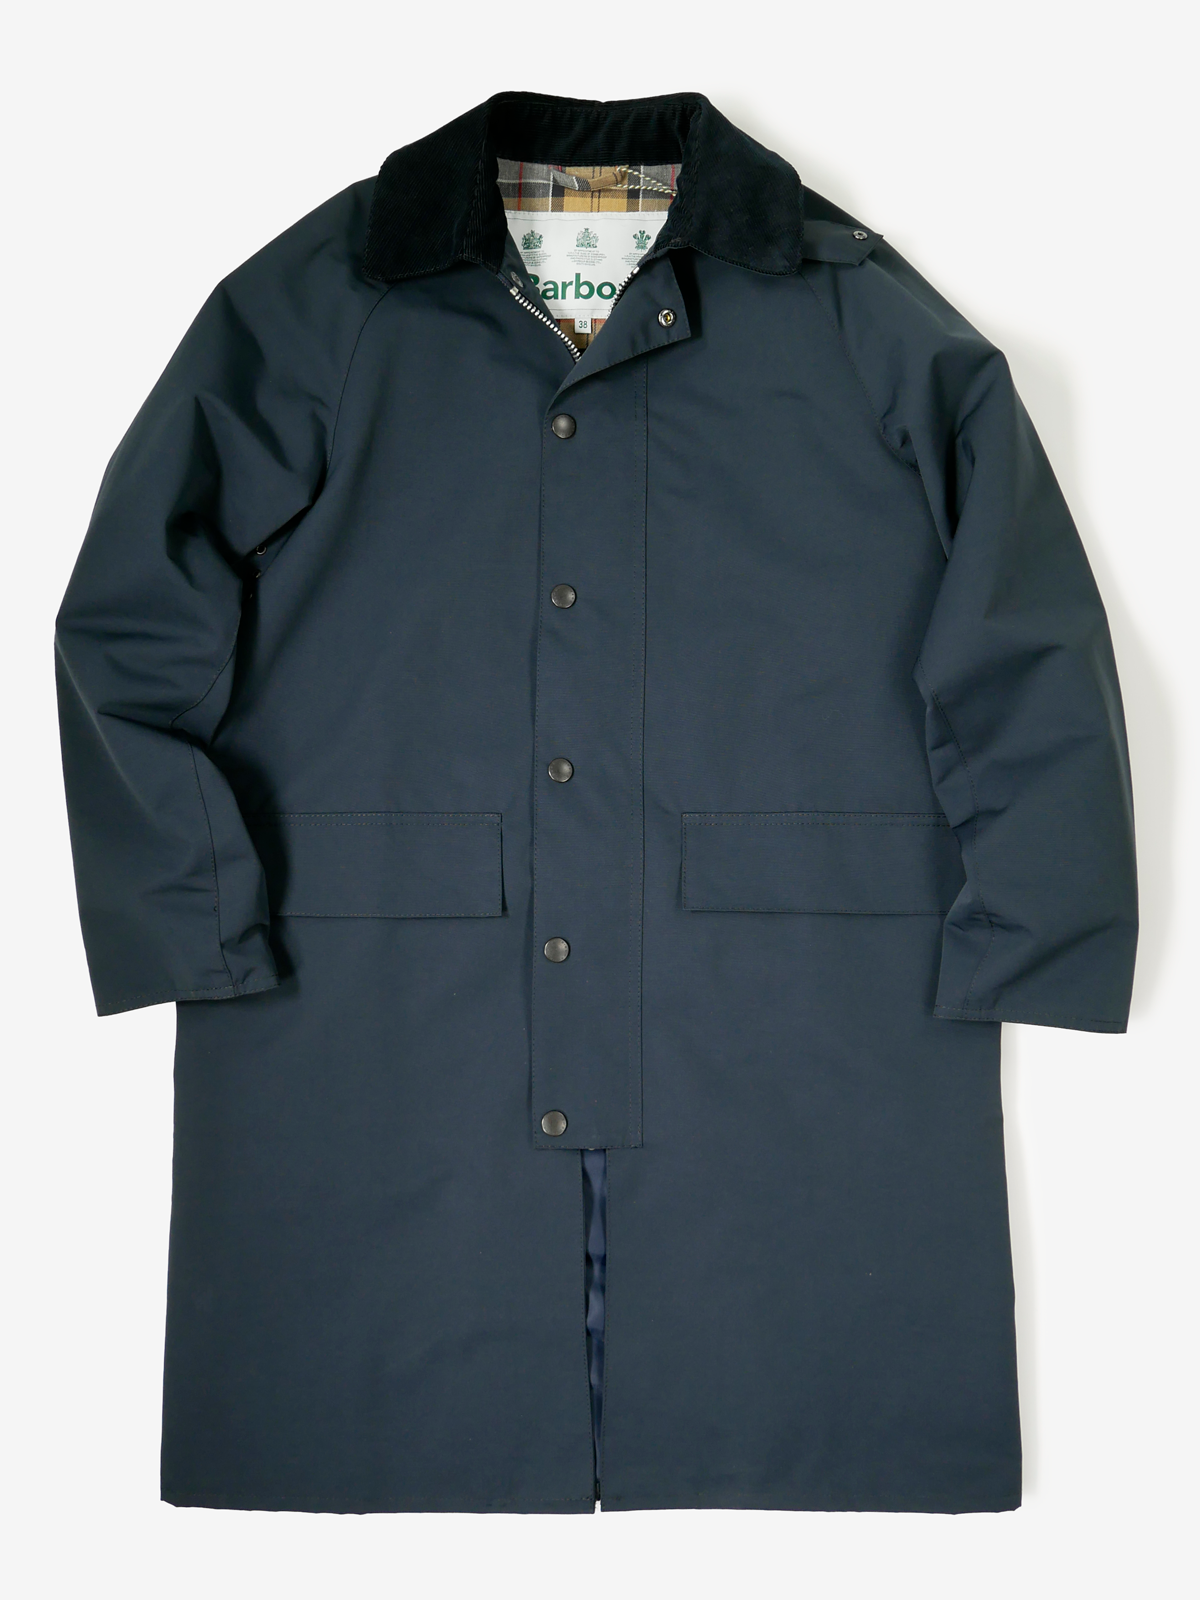 BARBOUR｜NEW BURGHLEY JACKET 2LAYER｜ネイビー